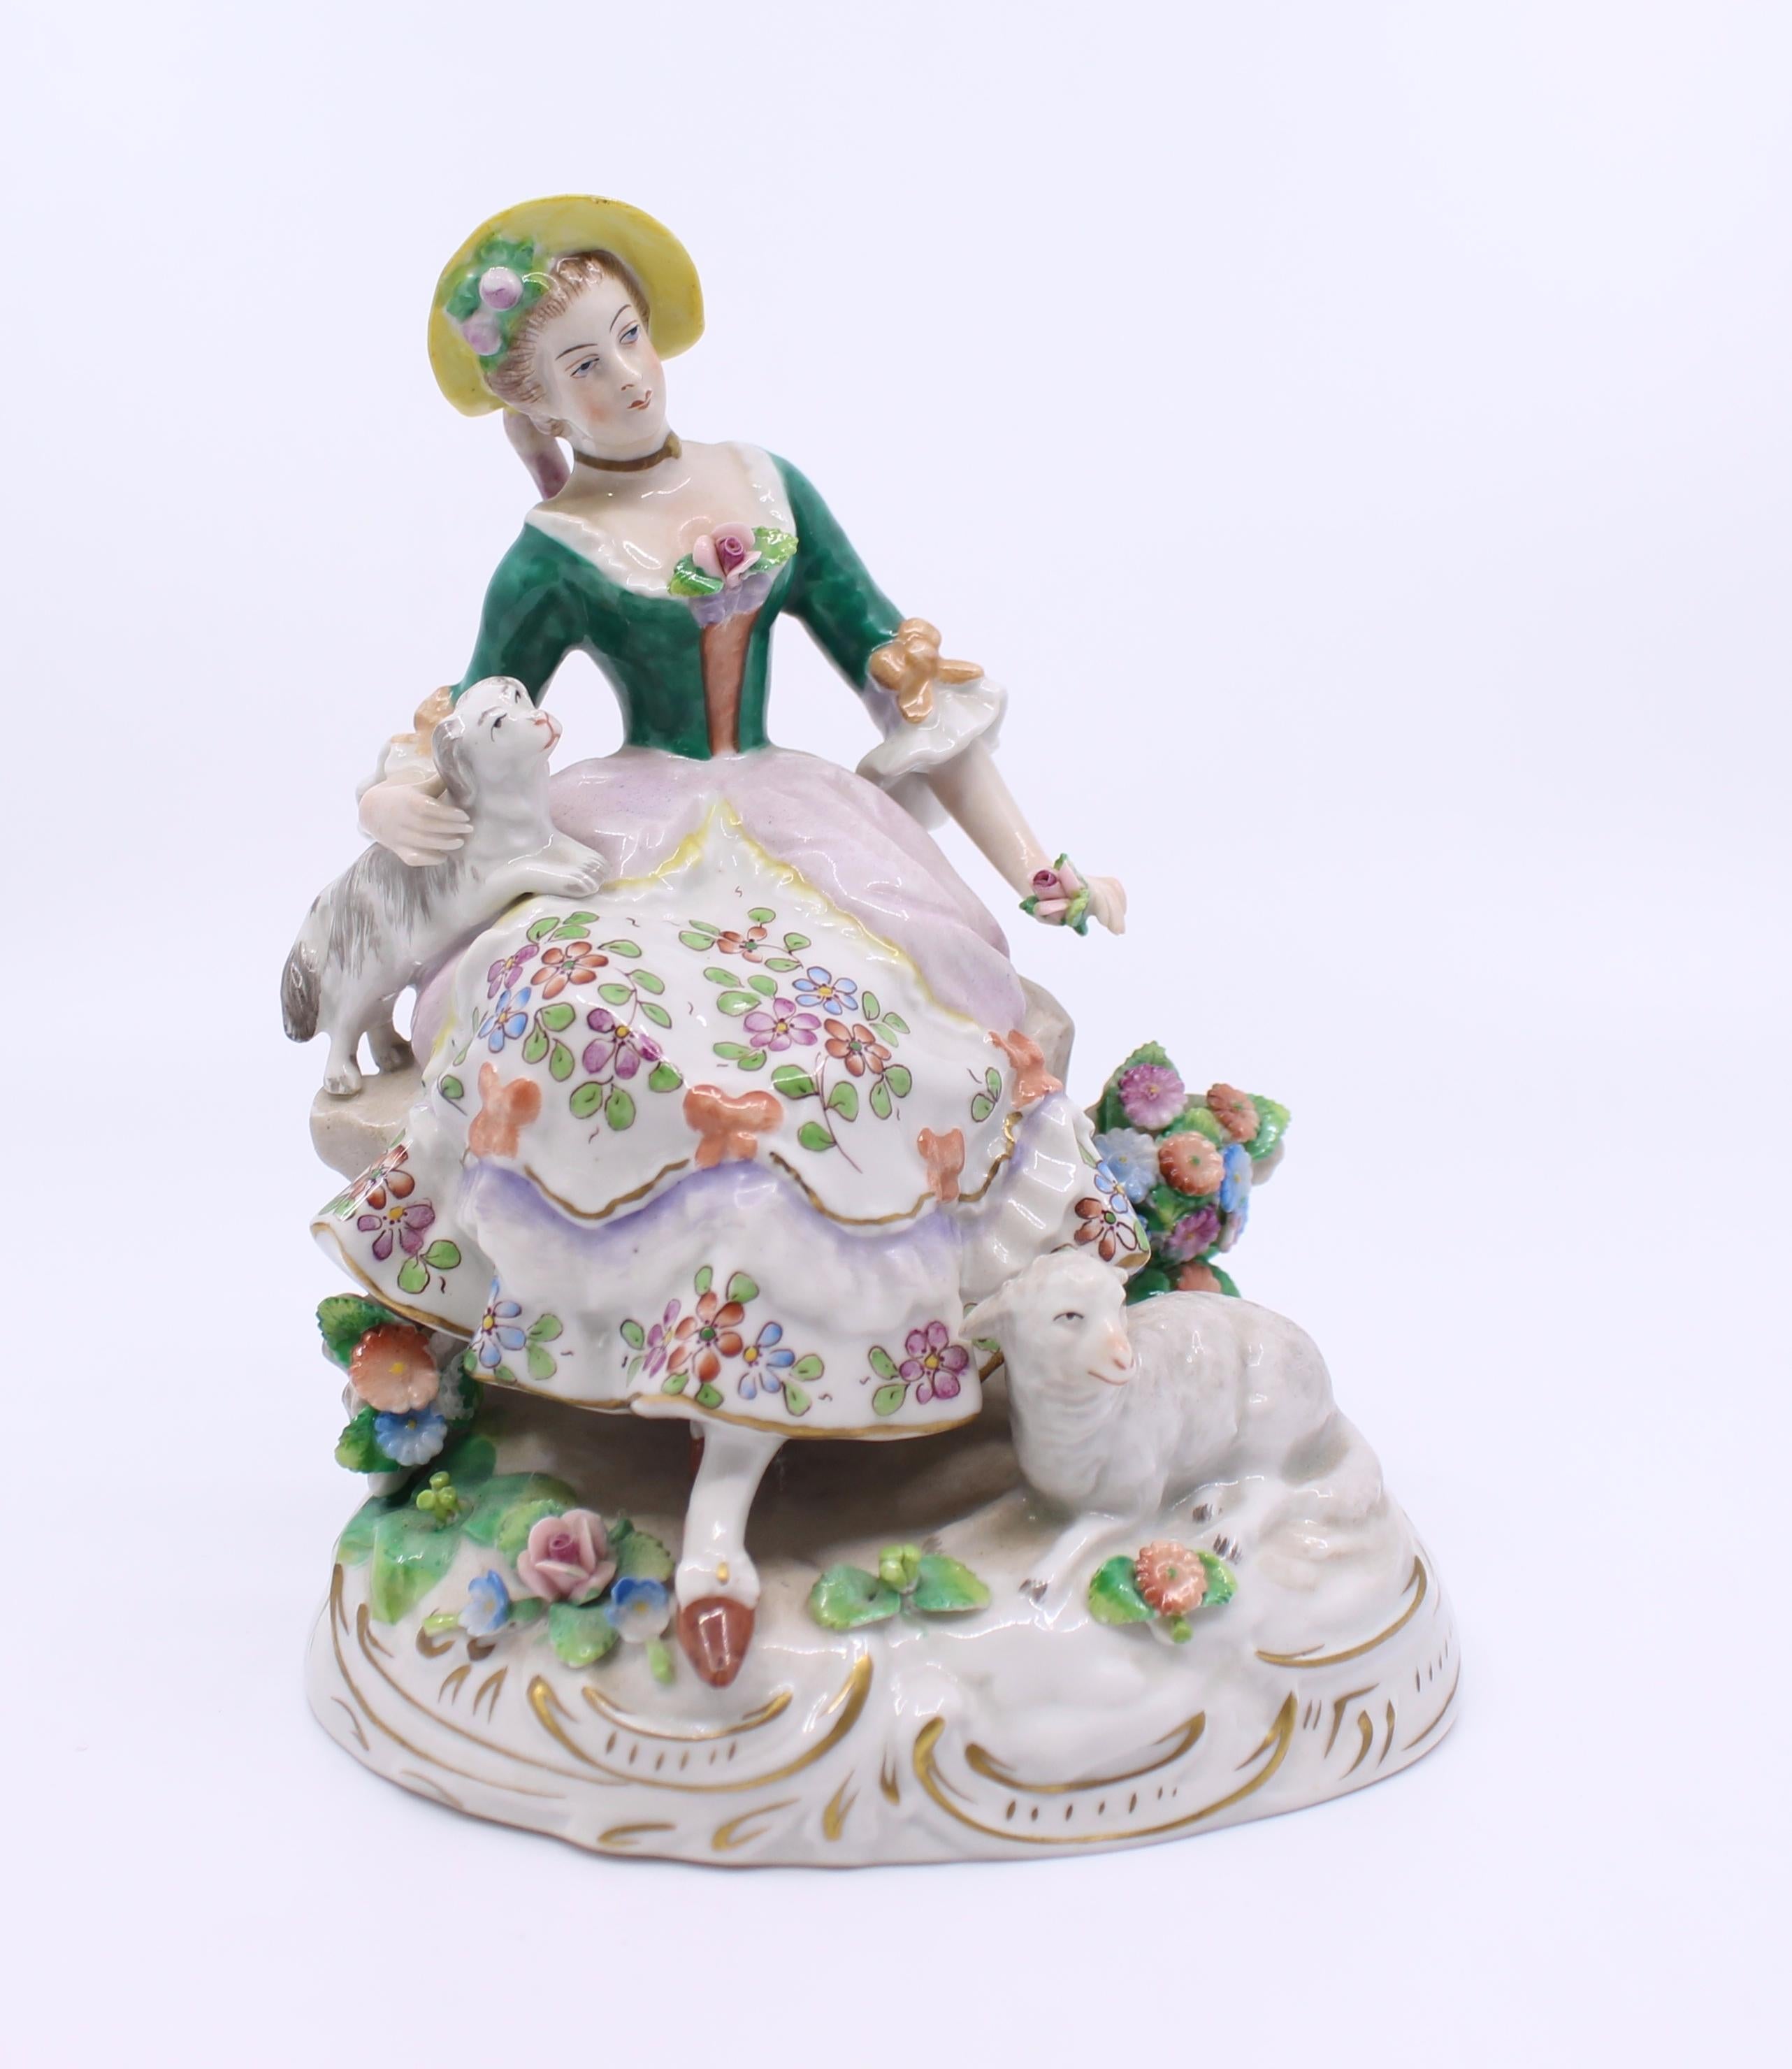 Sitzendorf Porcelain Shepherdess Figurine


Mid 20th c., c.1950

Manufactured by Sitzendorf, Germany

Width 12 cm / 4 1/2 in

Depth 9 cm / 3 1/2 in

Height 15.5 cm / 6 in

Very good condition. No chips to fingers or flowers
